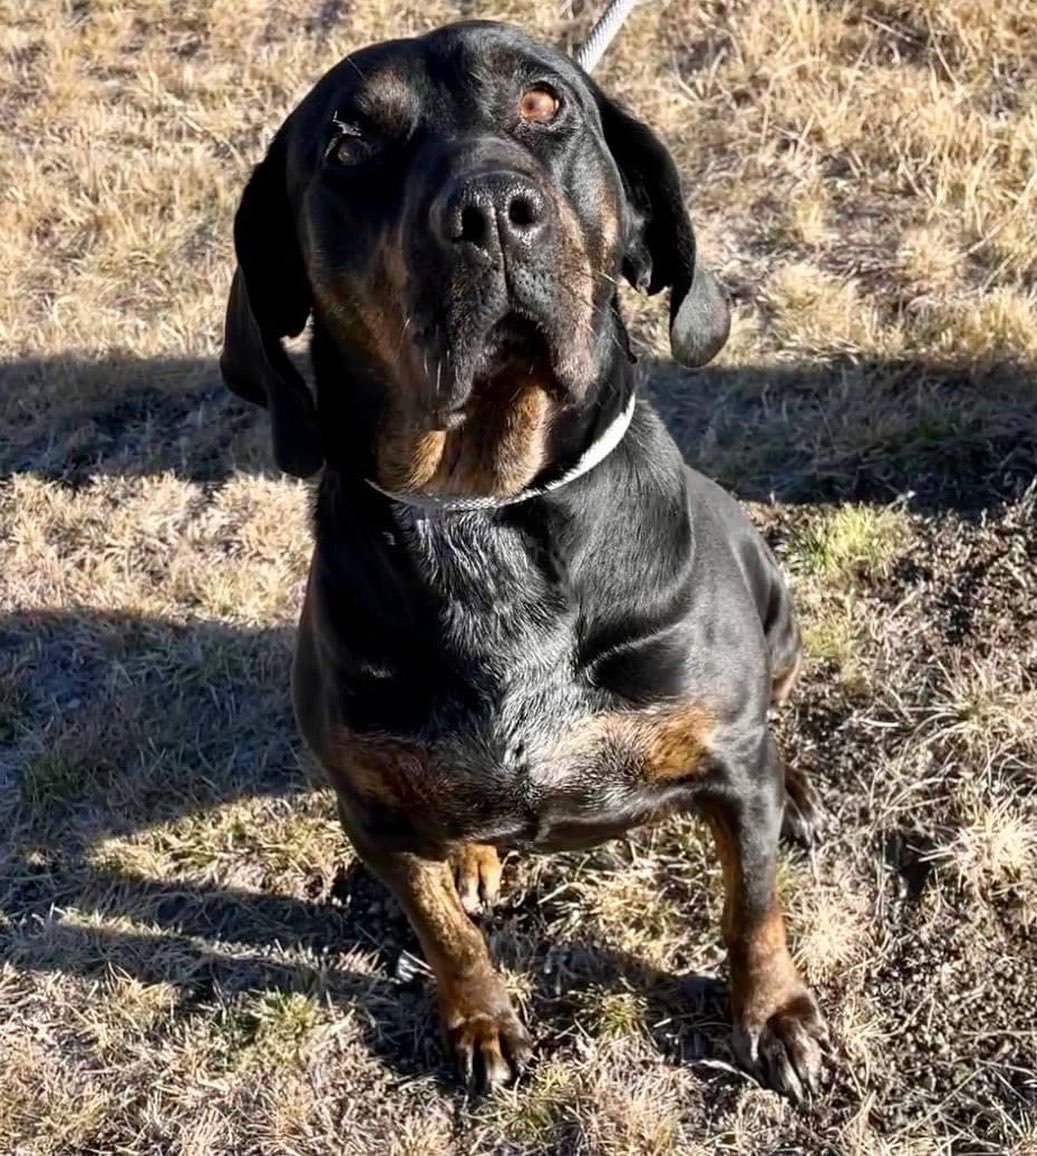 Meet Martha Washington!
Bloodhound/Rottweiler
Spayed Female
Est. Age: 7 Years
Weight: 74 lbs.

Bio Coming Soon. If you would like additional information in the meantime, please give us a call at 208.788.4351 or email adoptions@mountainhumane.org.